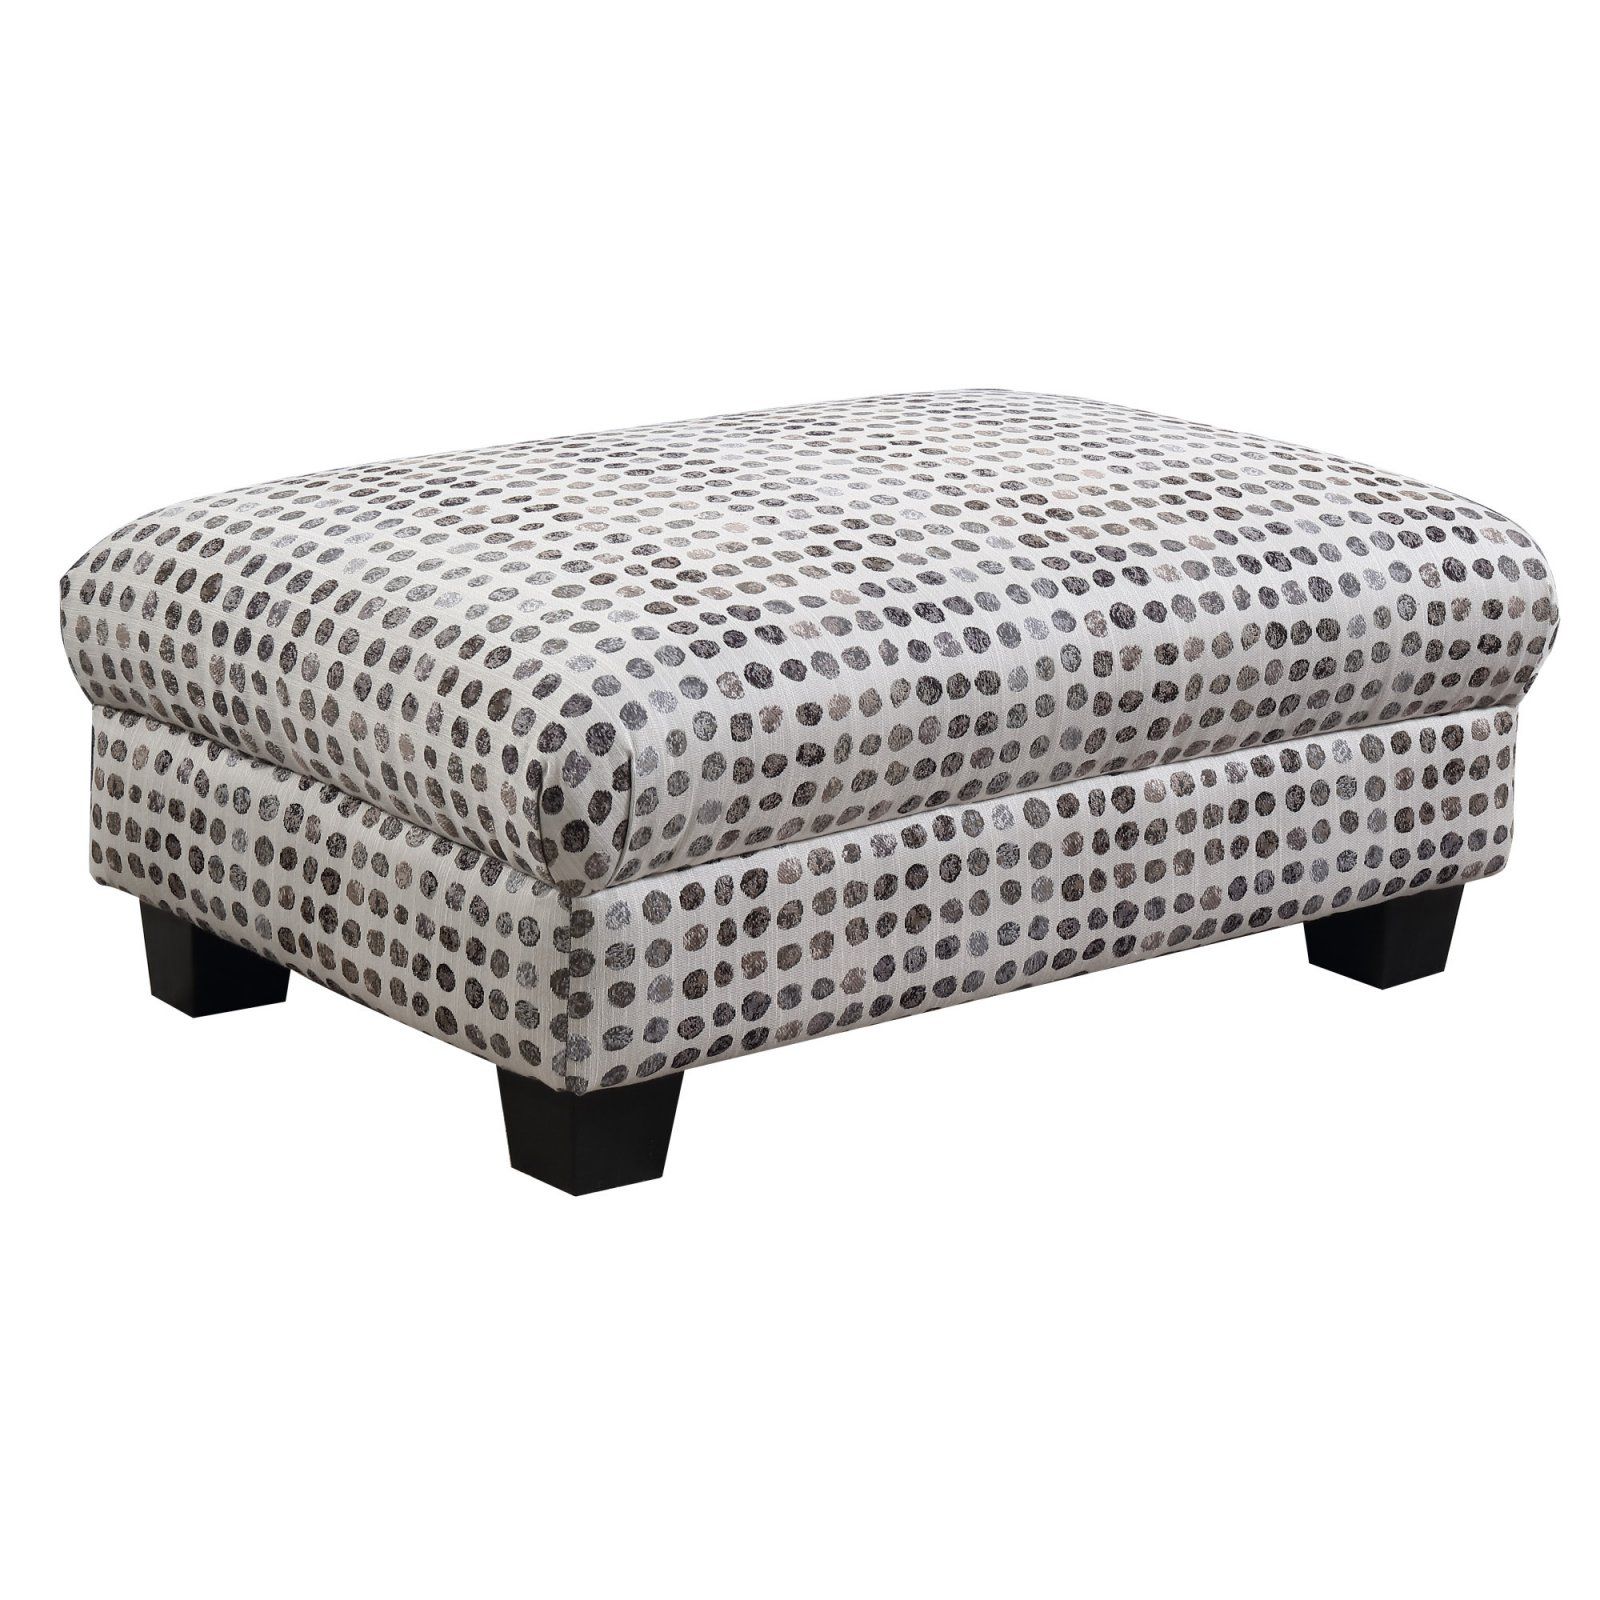 Hn Home Austin Transitional Ottoman – Charcoal Dot – Walmart Pertaining To Charcoal Dot Ottomans (View 1 of 15)